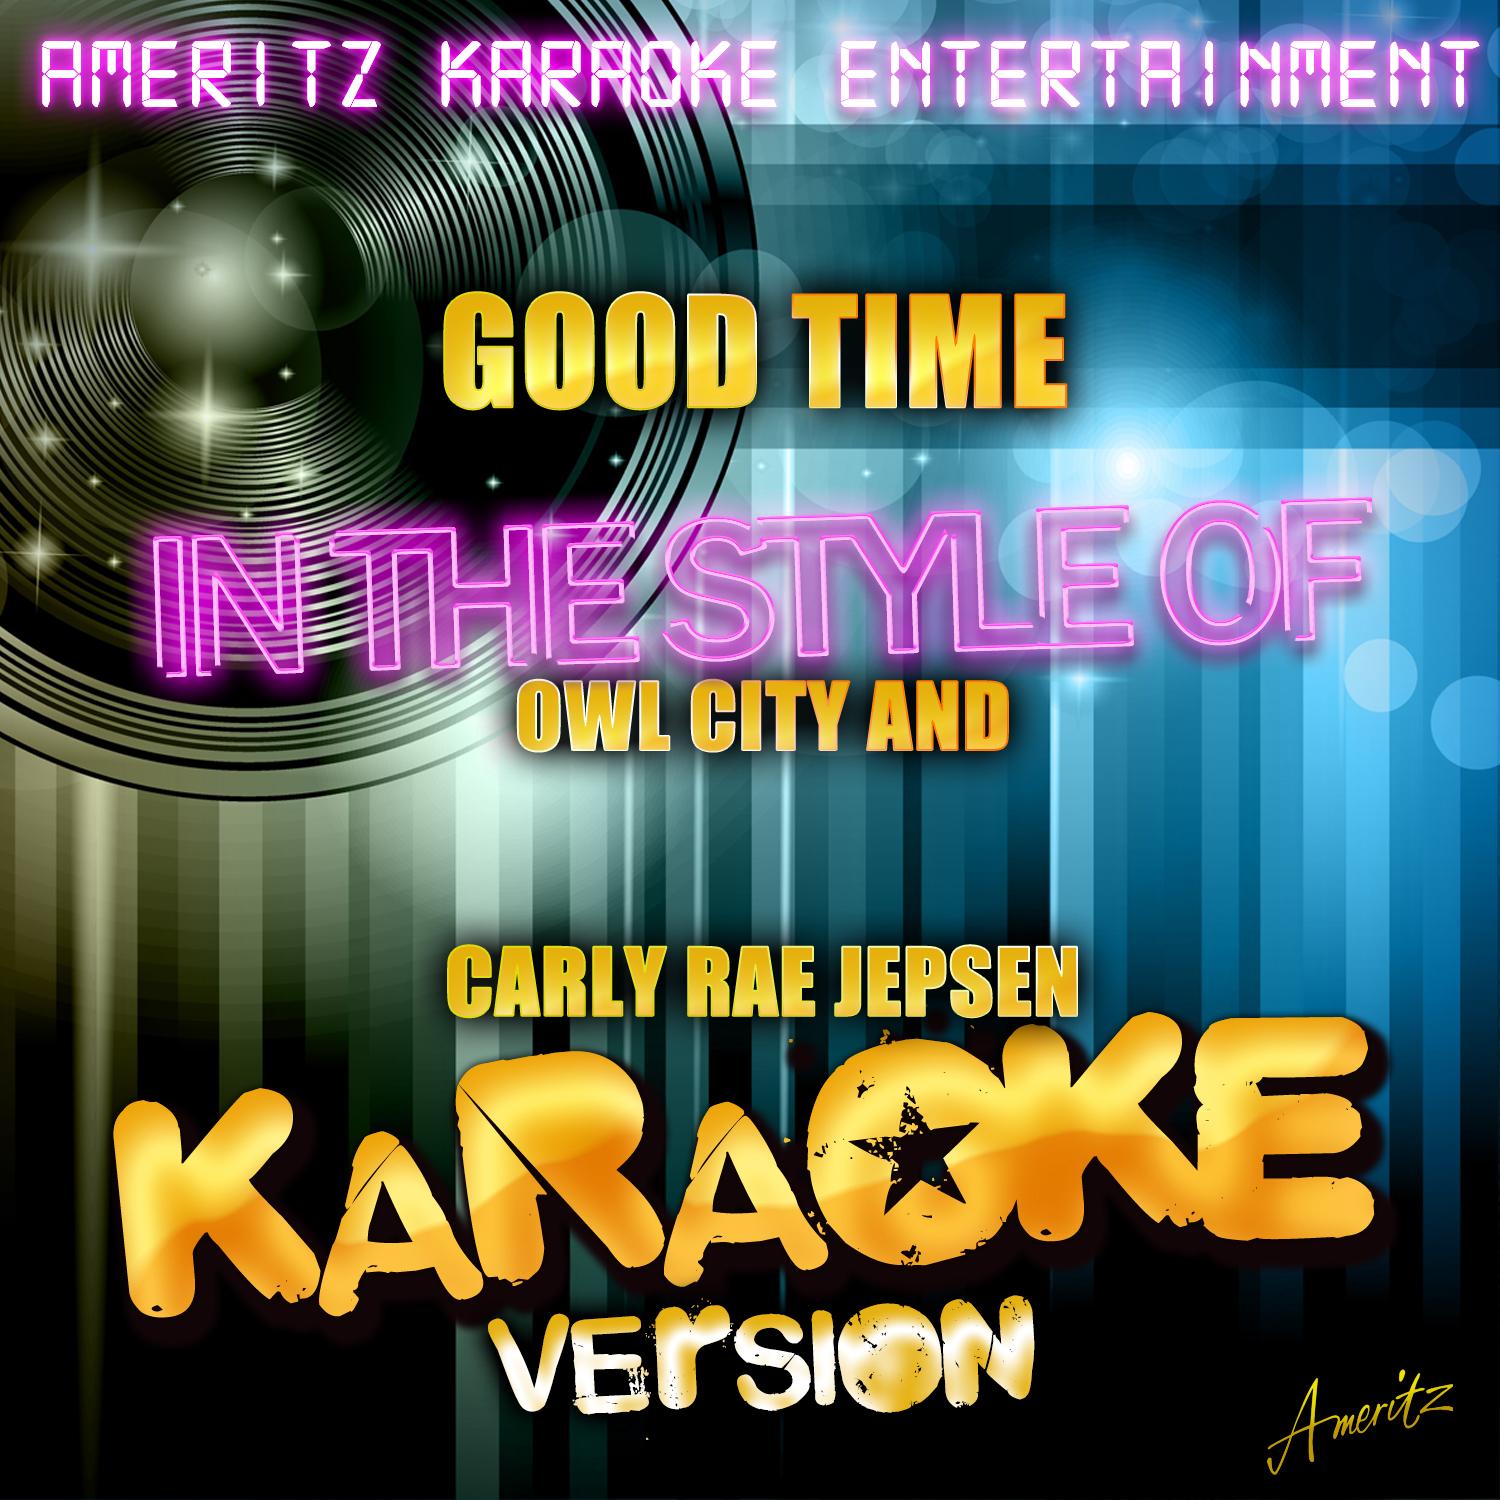 Good Time (In the Style of Owl City and Carly Rae Jepsen) [Karaoke Version]